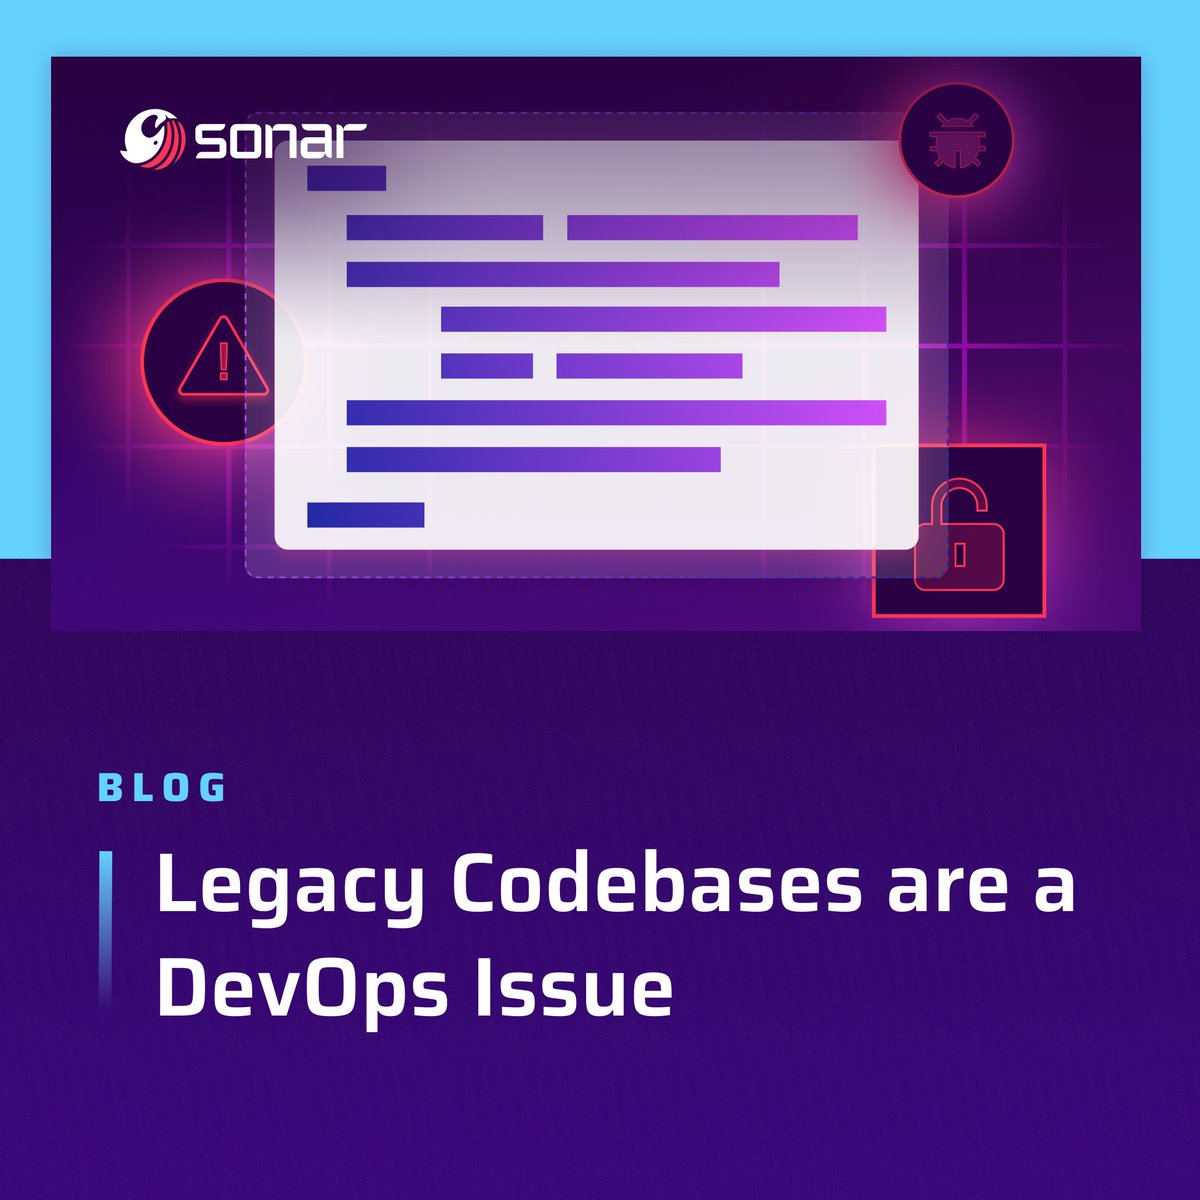 #CleanCodeTips 🧑‍💻 Legacy Codebases are a DevOps Issue! In this blog, @bendechrai outlines actionable strategies for refactoring, automation, and adopting a 'Clean as You Code' approach to ensure sustainable code quality! Read the full story here 👉 bit.ly/4avw5I5